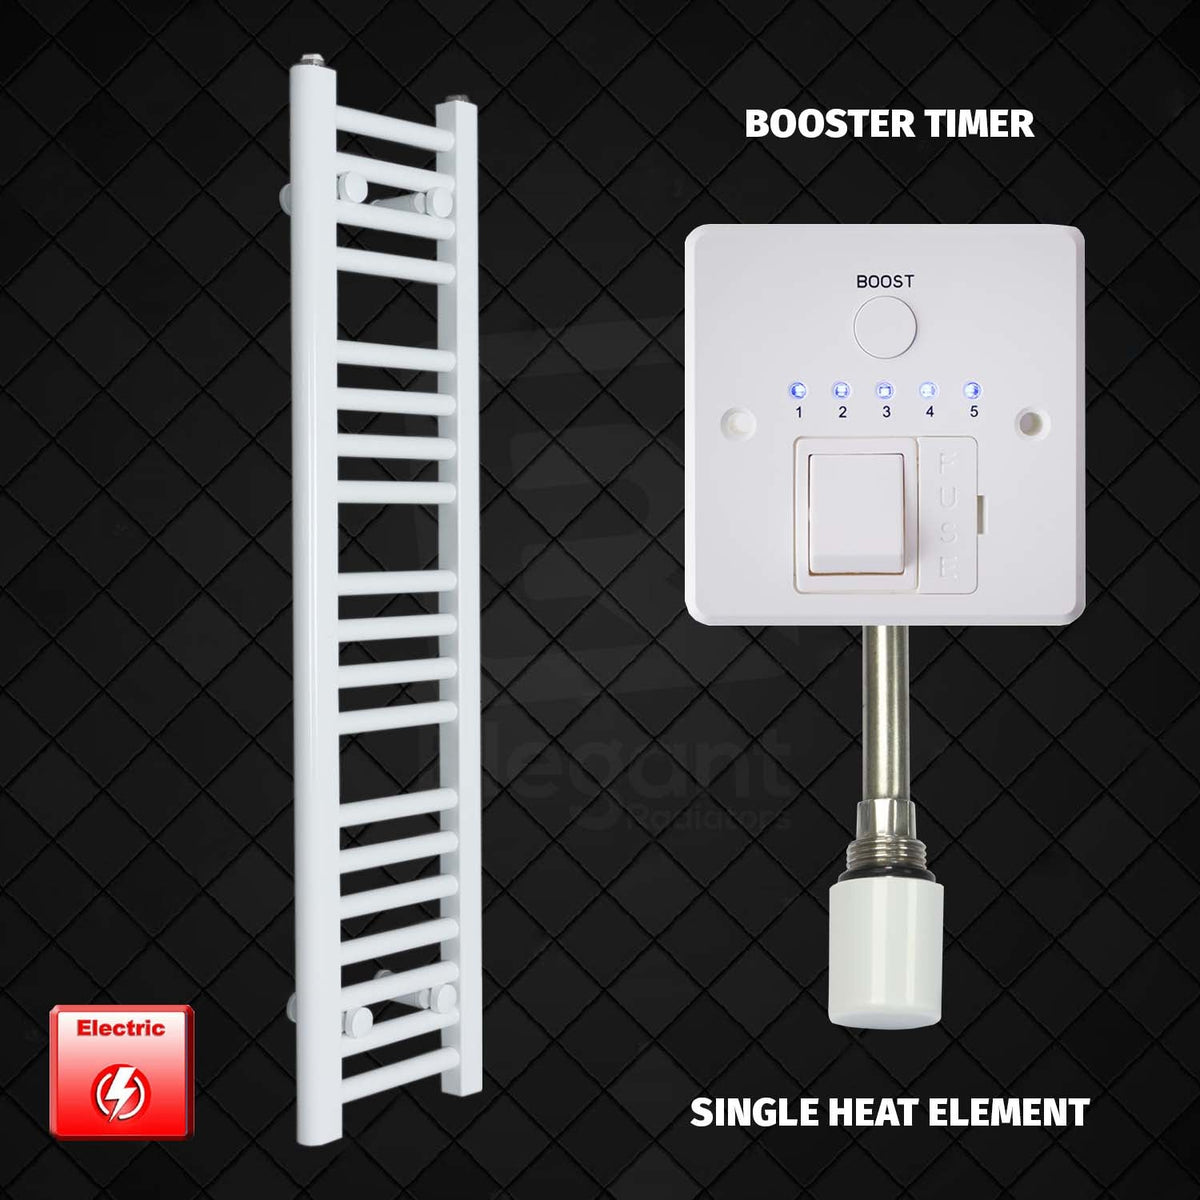 1000 mm High 200 mm Wide Pre-Filled Electric Towel Rail White HTR Single Heat Element Booster Timer